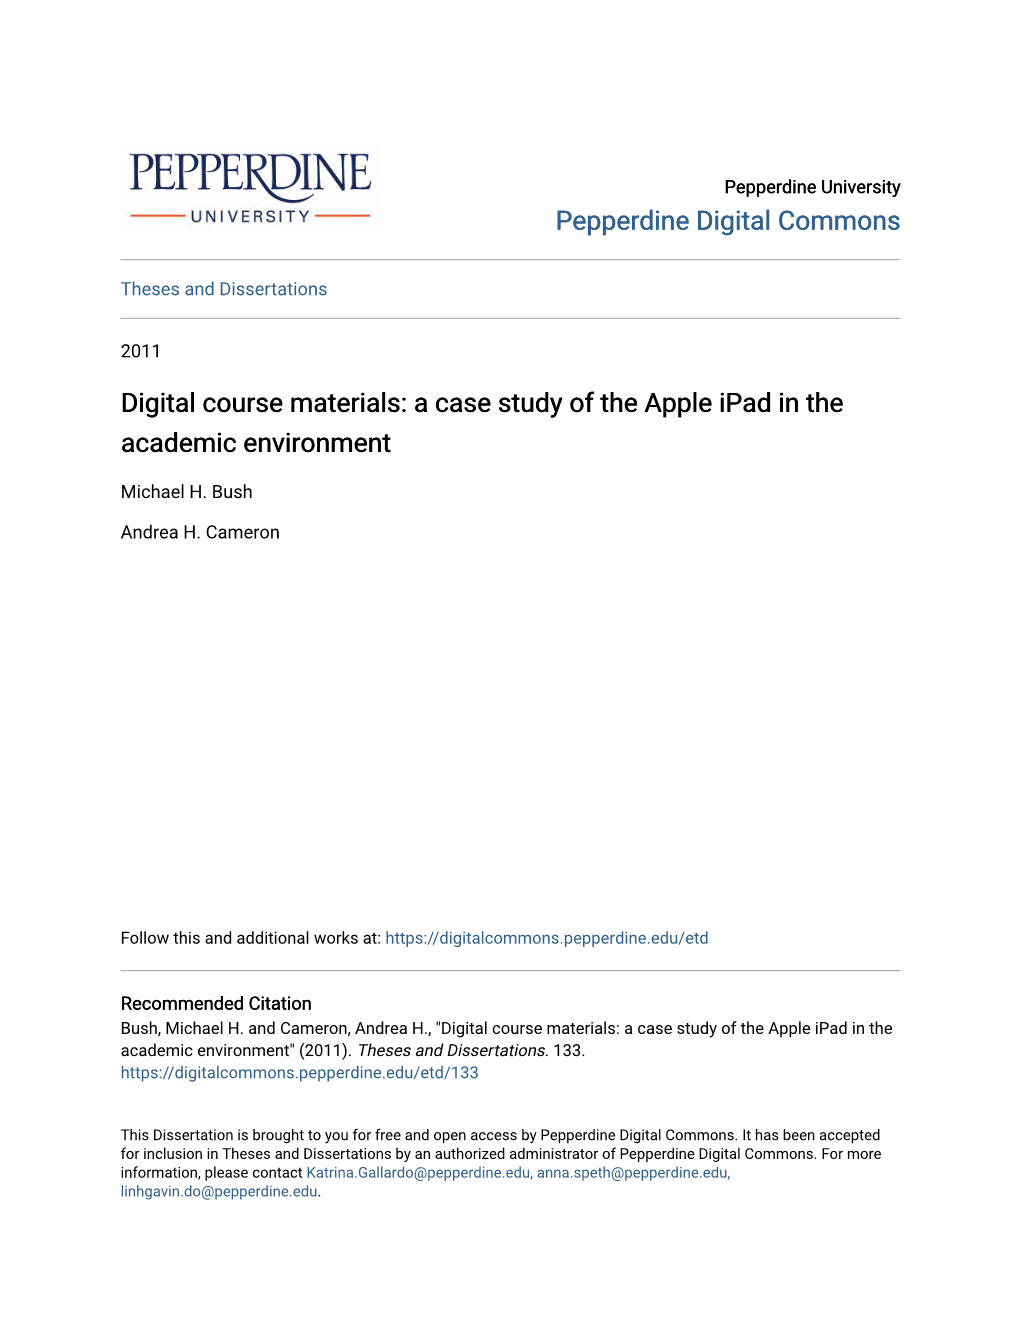 Digital Course Materials: a Case Study of the Apple Ipad in the Academic Environment